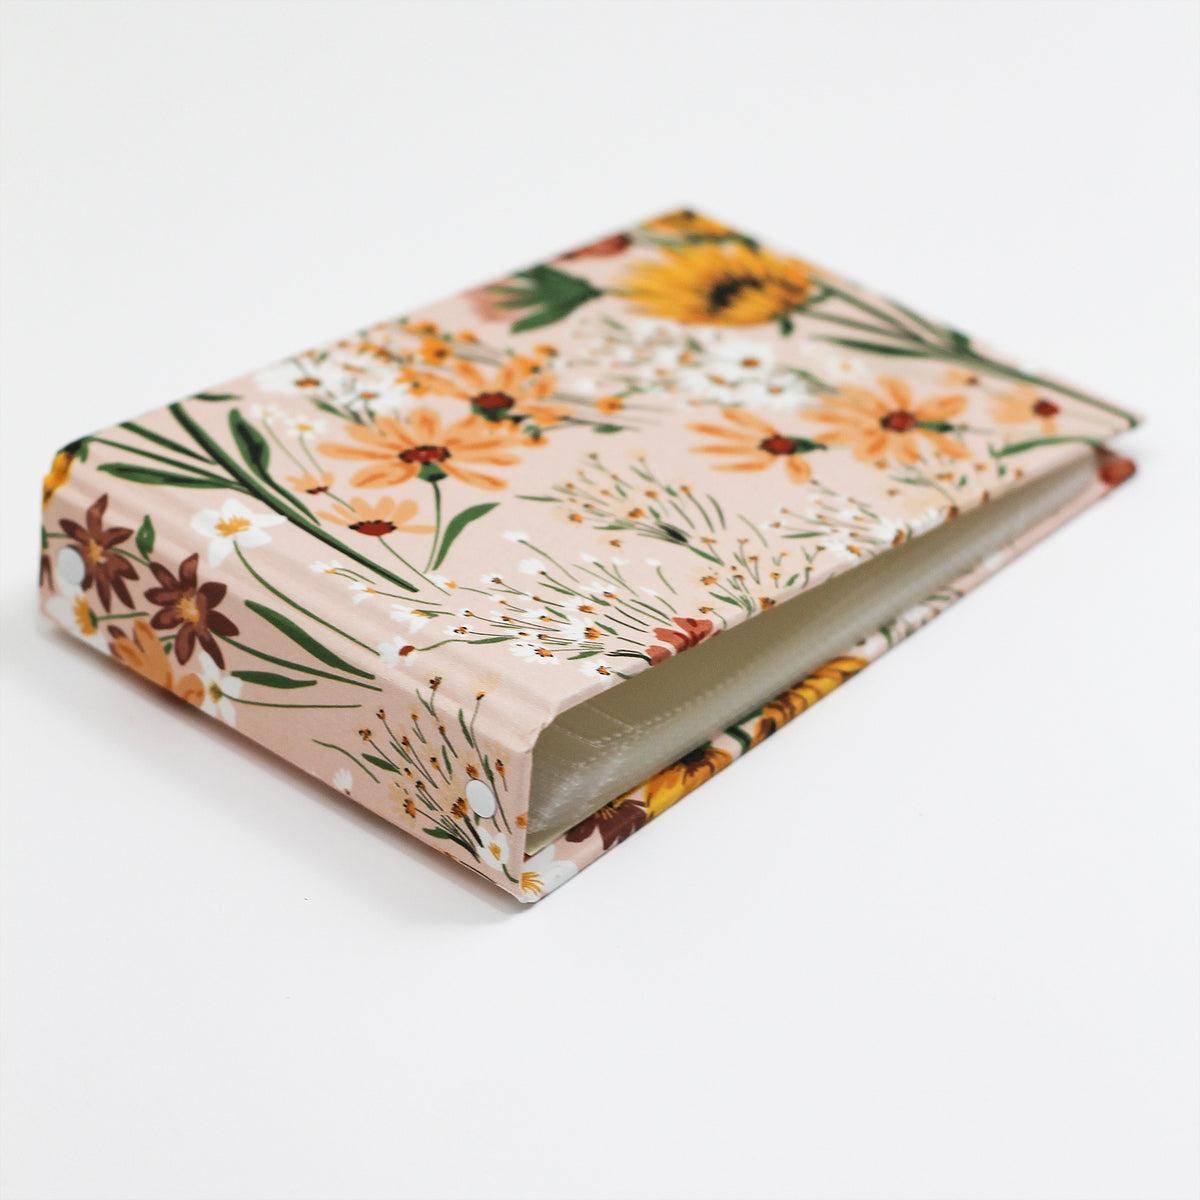 Small Photo Binder | for 4x6 Photos | with Sunflower Bouquet Fabric Cover